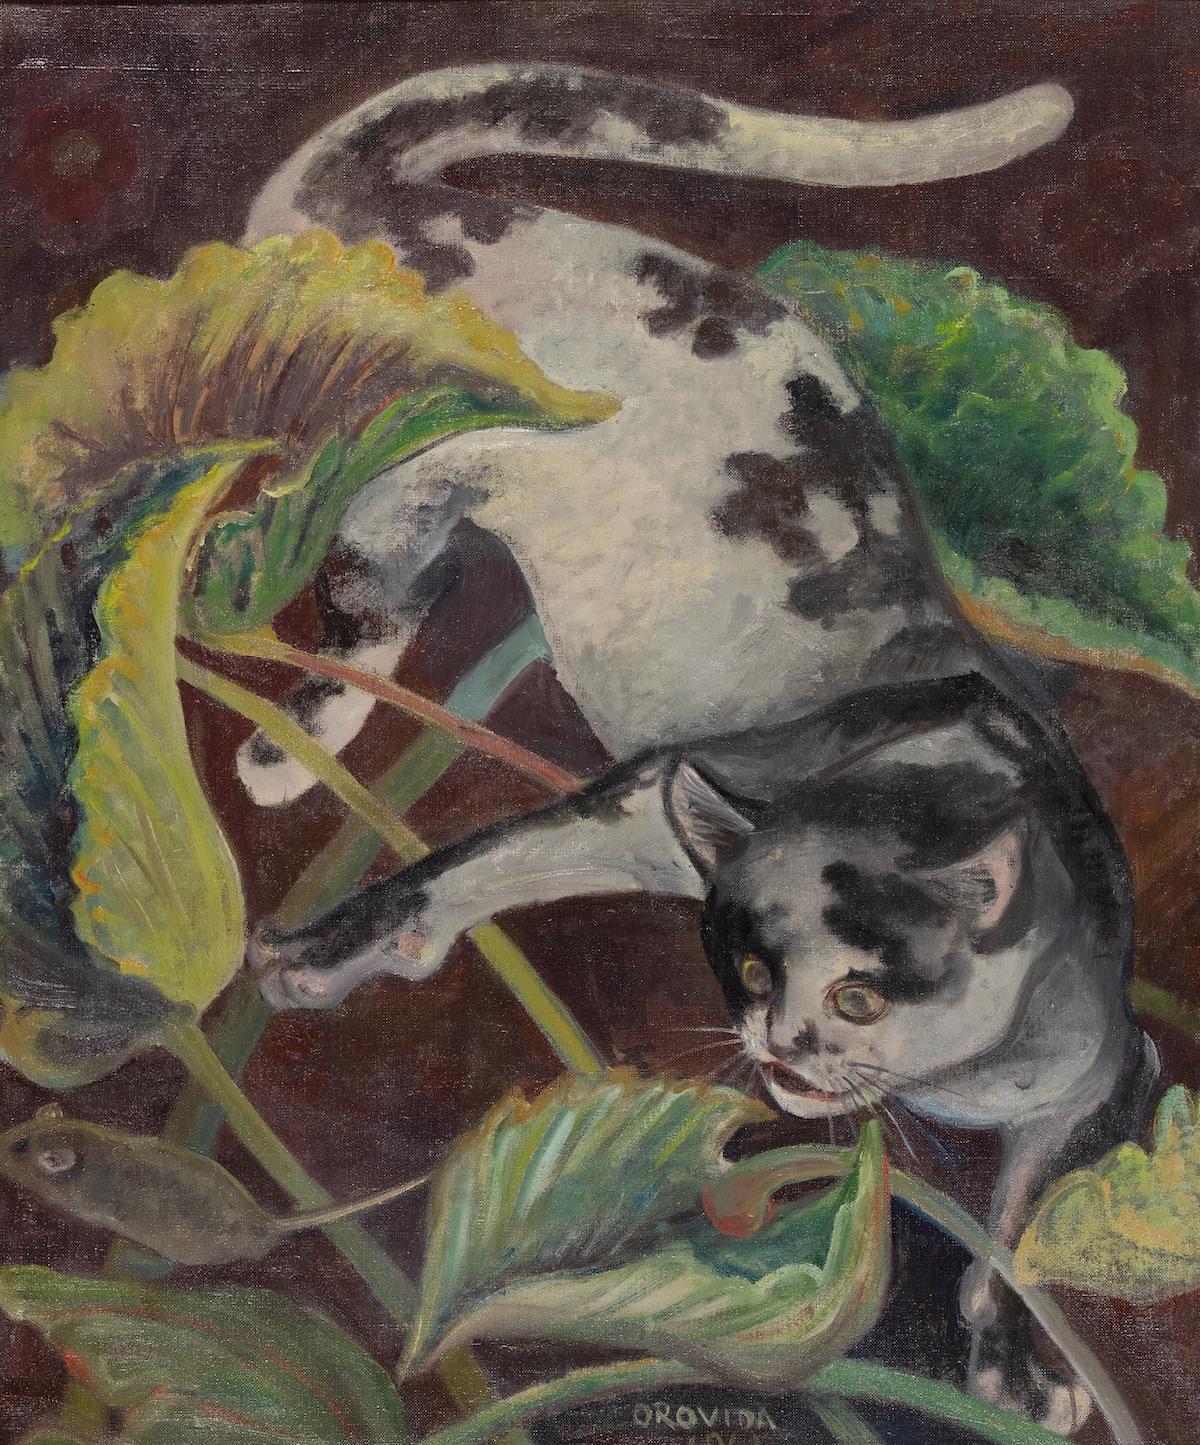 Cat and Mouse by Orovida Pissarro (1893-1968)
Oil on canvas
61 x 51 cm (24 x 20 ⅛ inches)
Signed and dated lower centre Orovida 1948, altered by the artist in 1966

Provenance
Royal Academy, London, 1966, no. 729
GV Kibblewhite, Southsea, Hampshire,